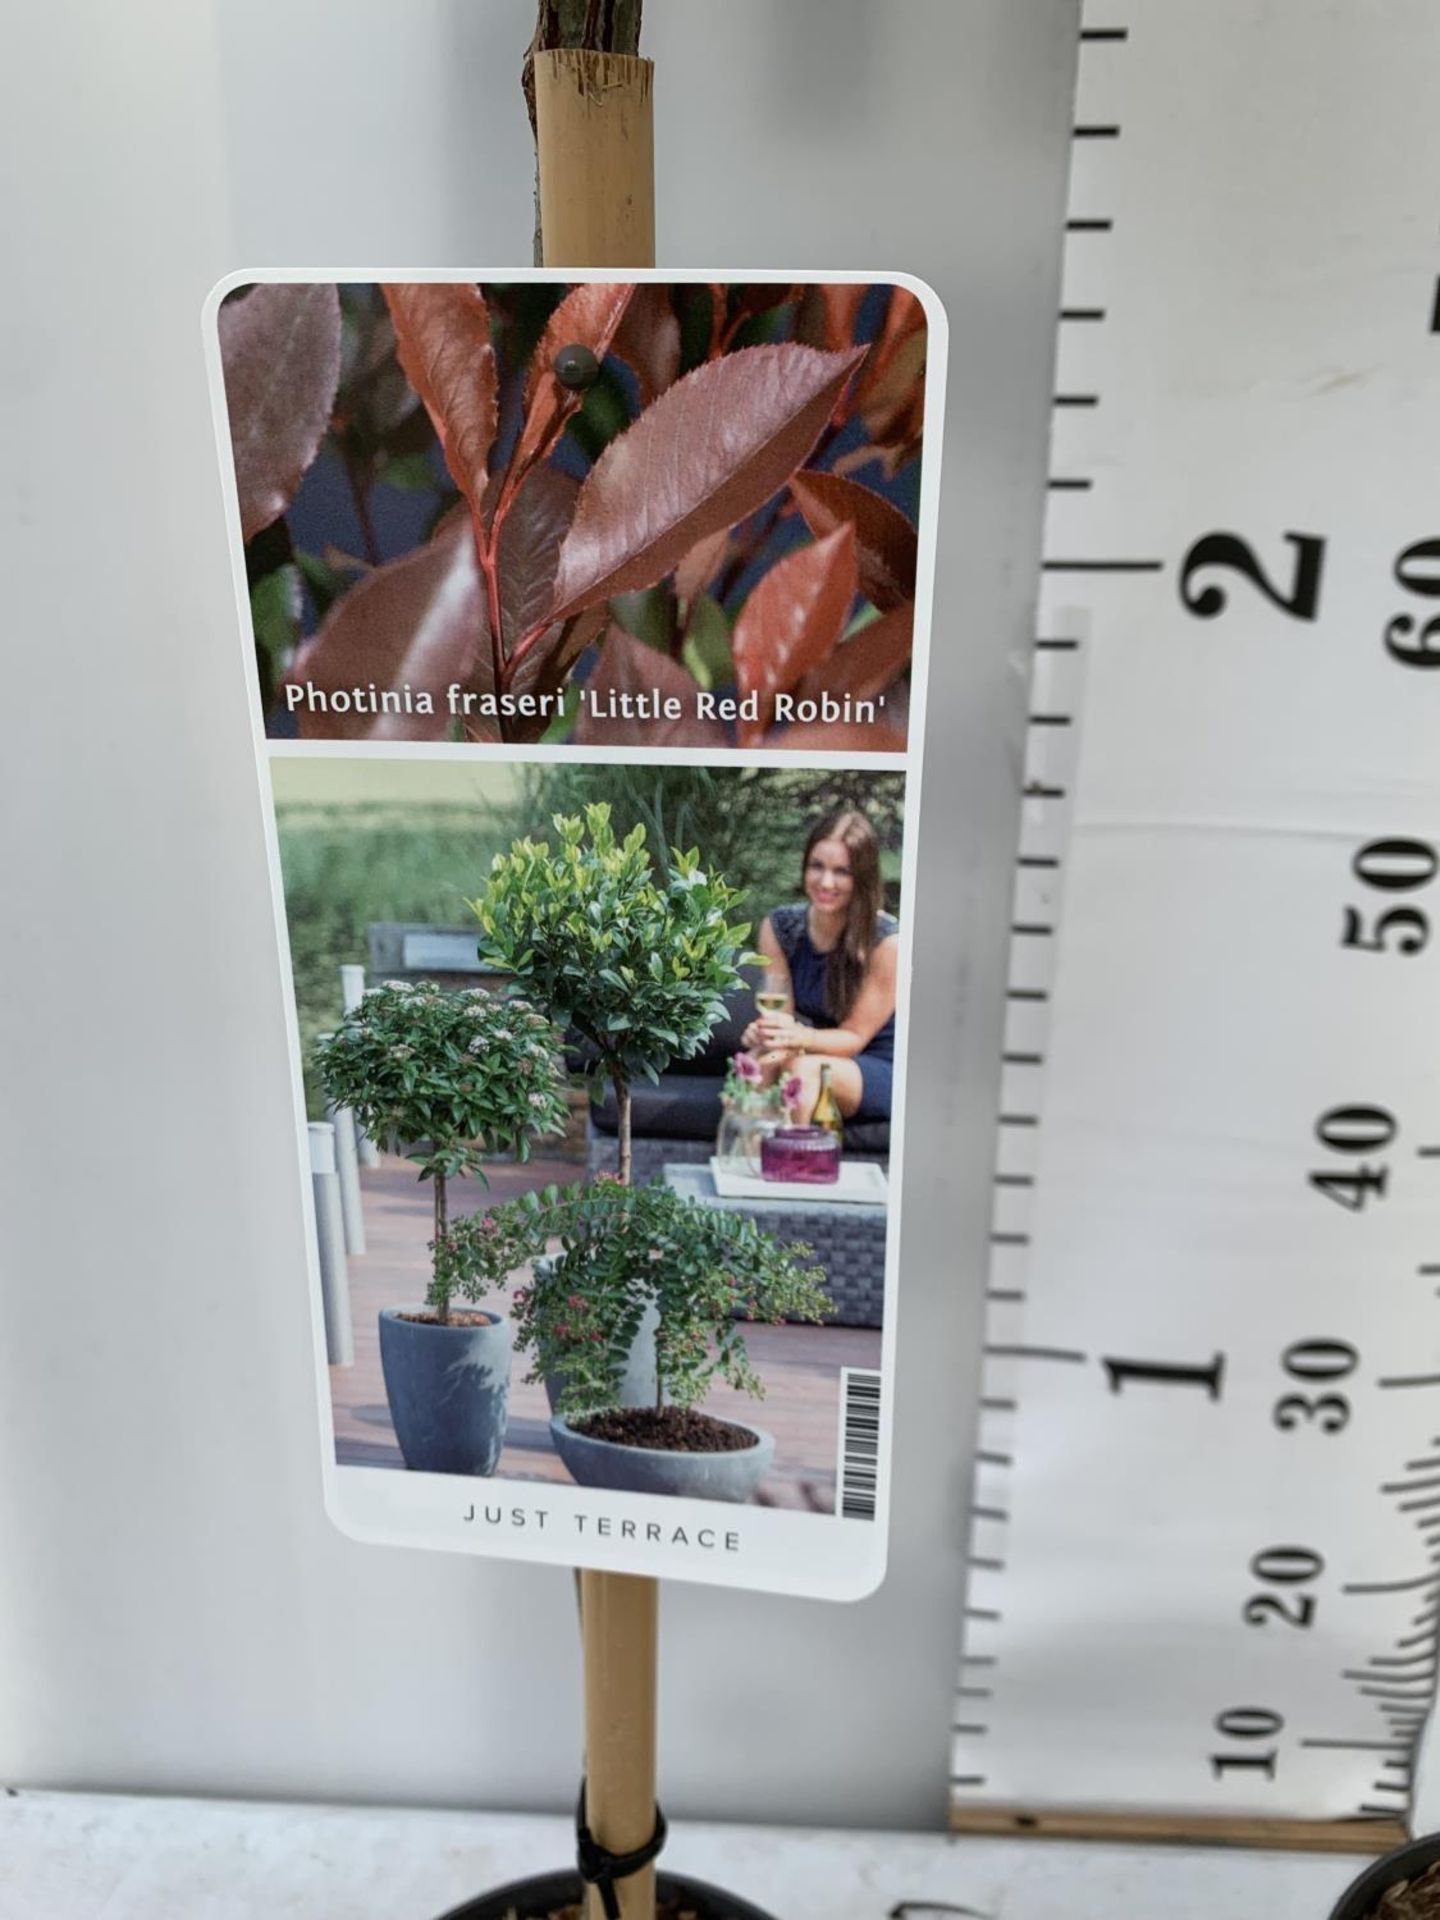 TWO PHOTINIA FRASERI STANDARD TREES 'LITTLE RED ROBIN' APPROX OVER ONE METRE IN HEIGHT IN 3LTR - Image 4 of 5